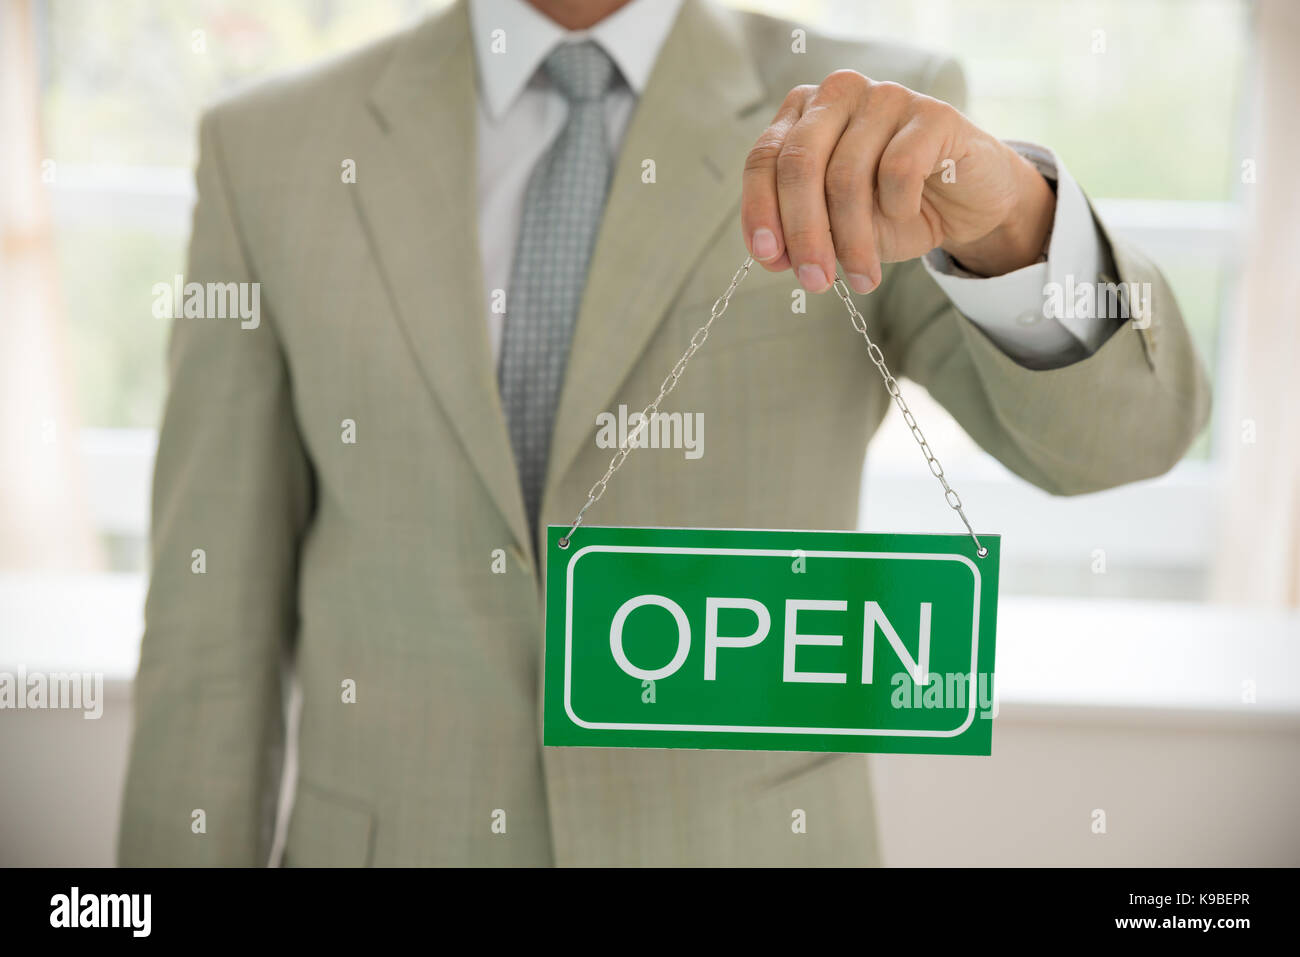 Close-up of a businessman holding open sign Banque D'Images